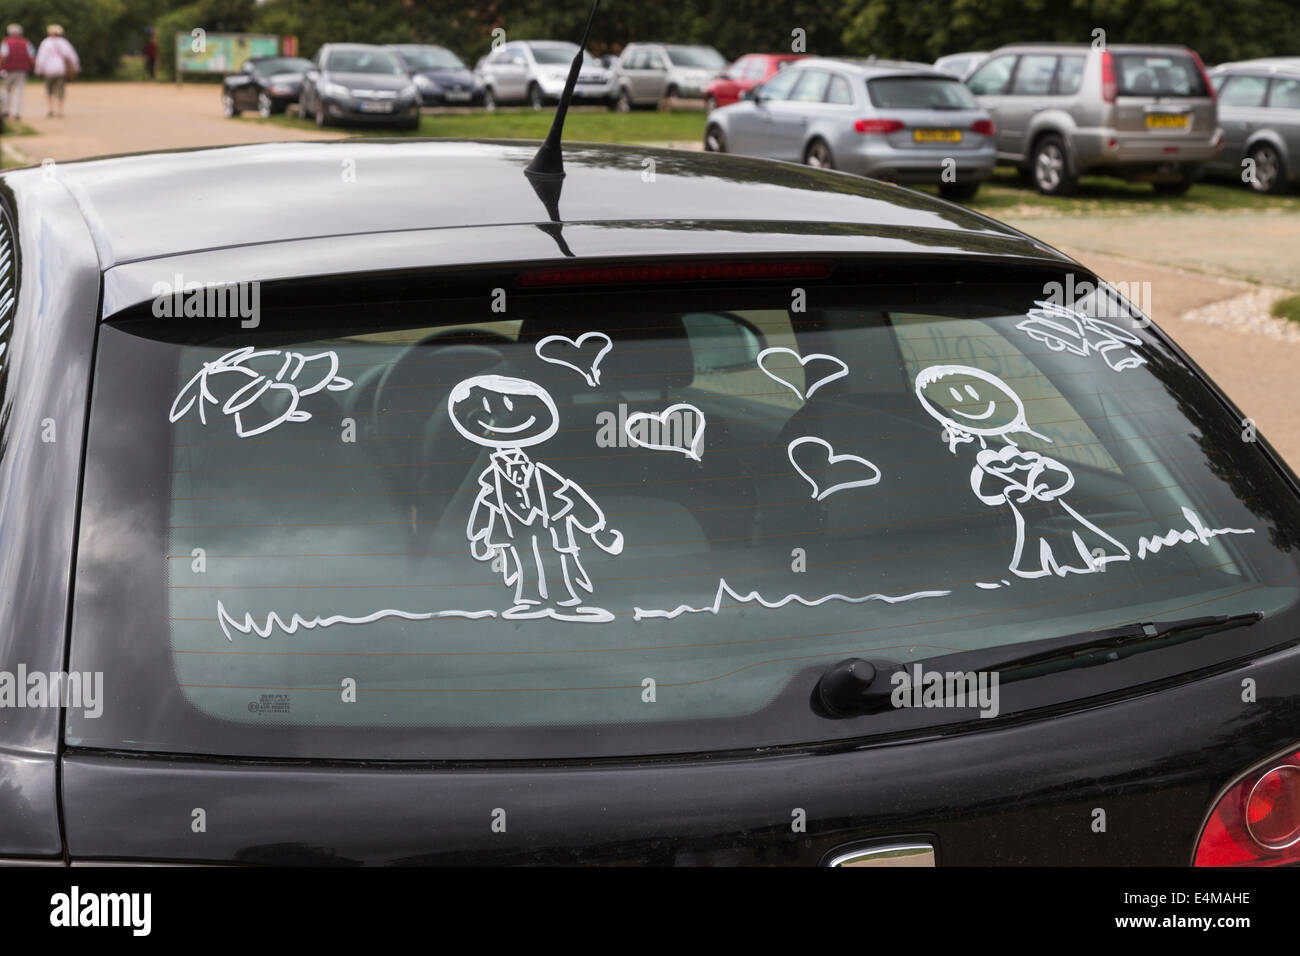 Figures of bride and groom painted on the rear window of a honeymooners' black car Stock Photo